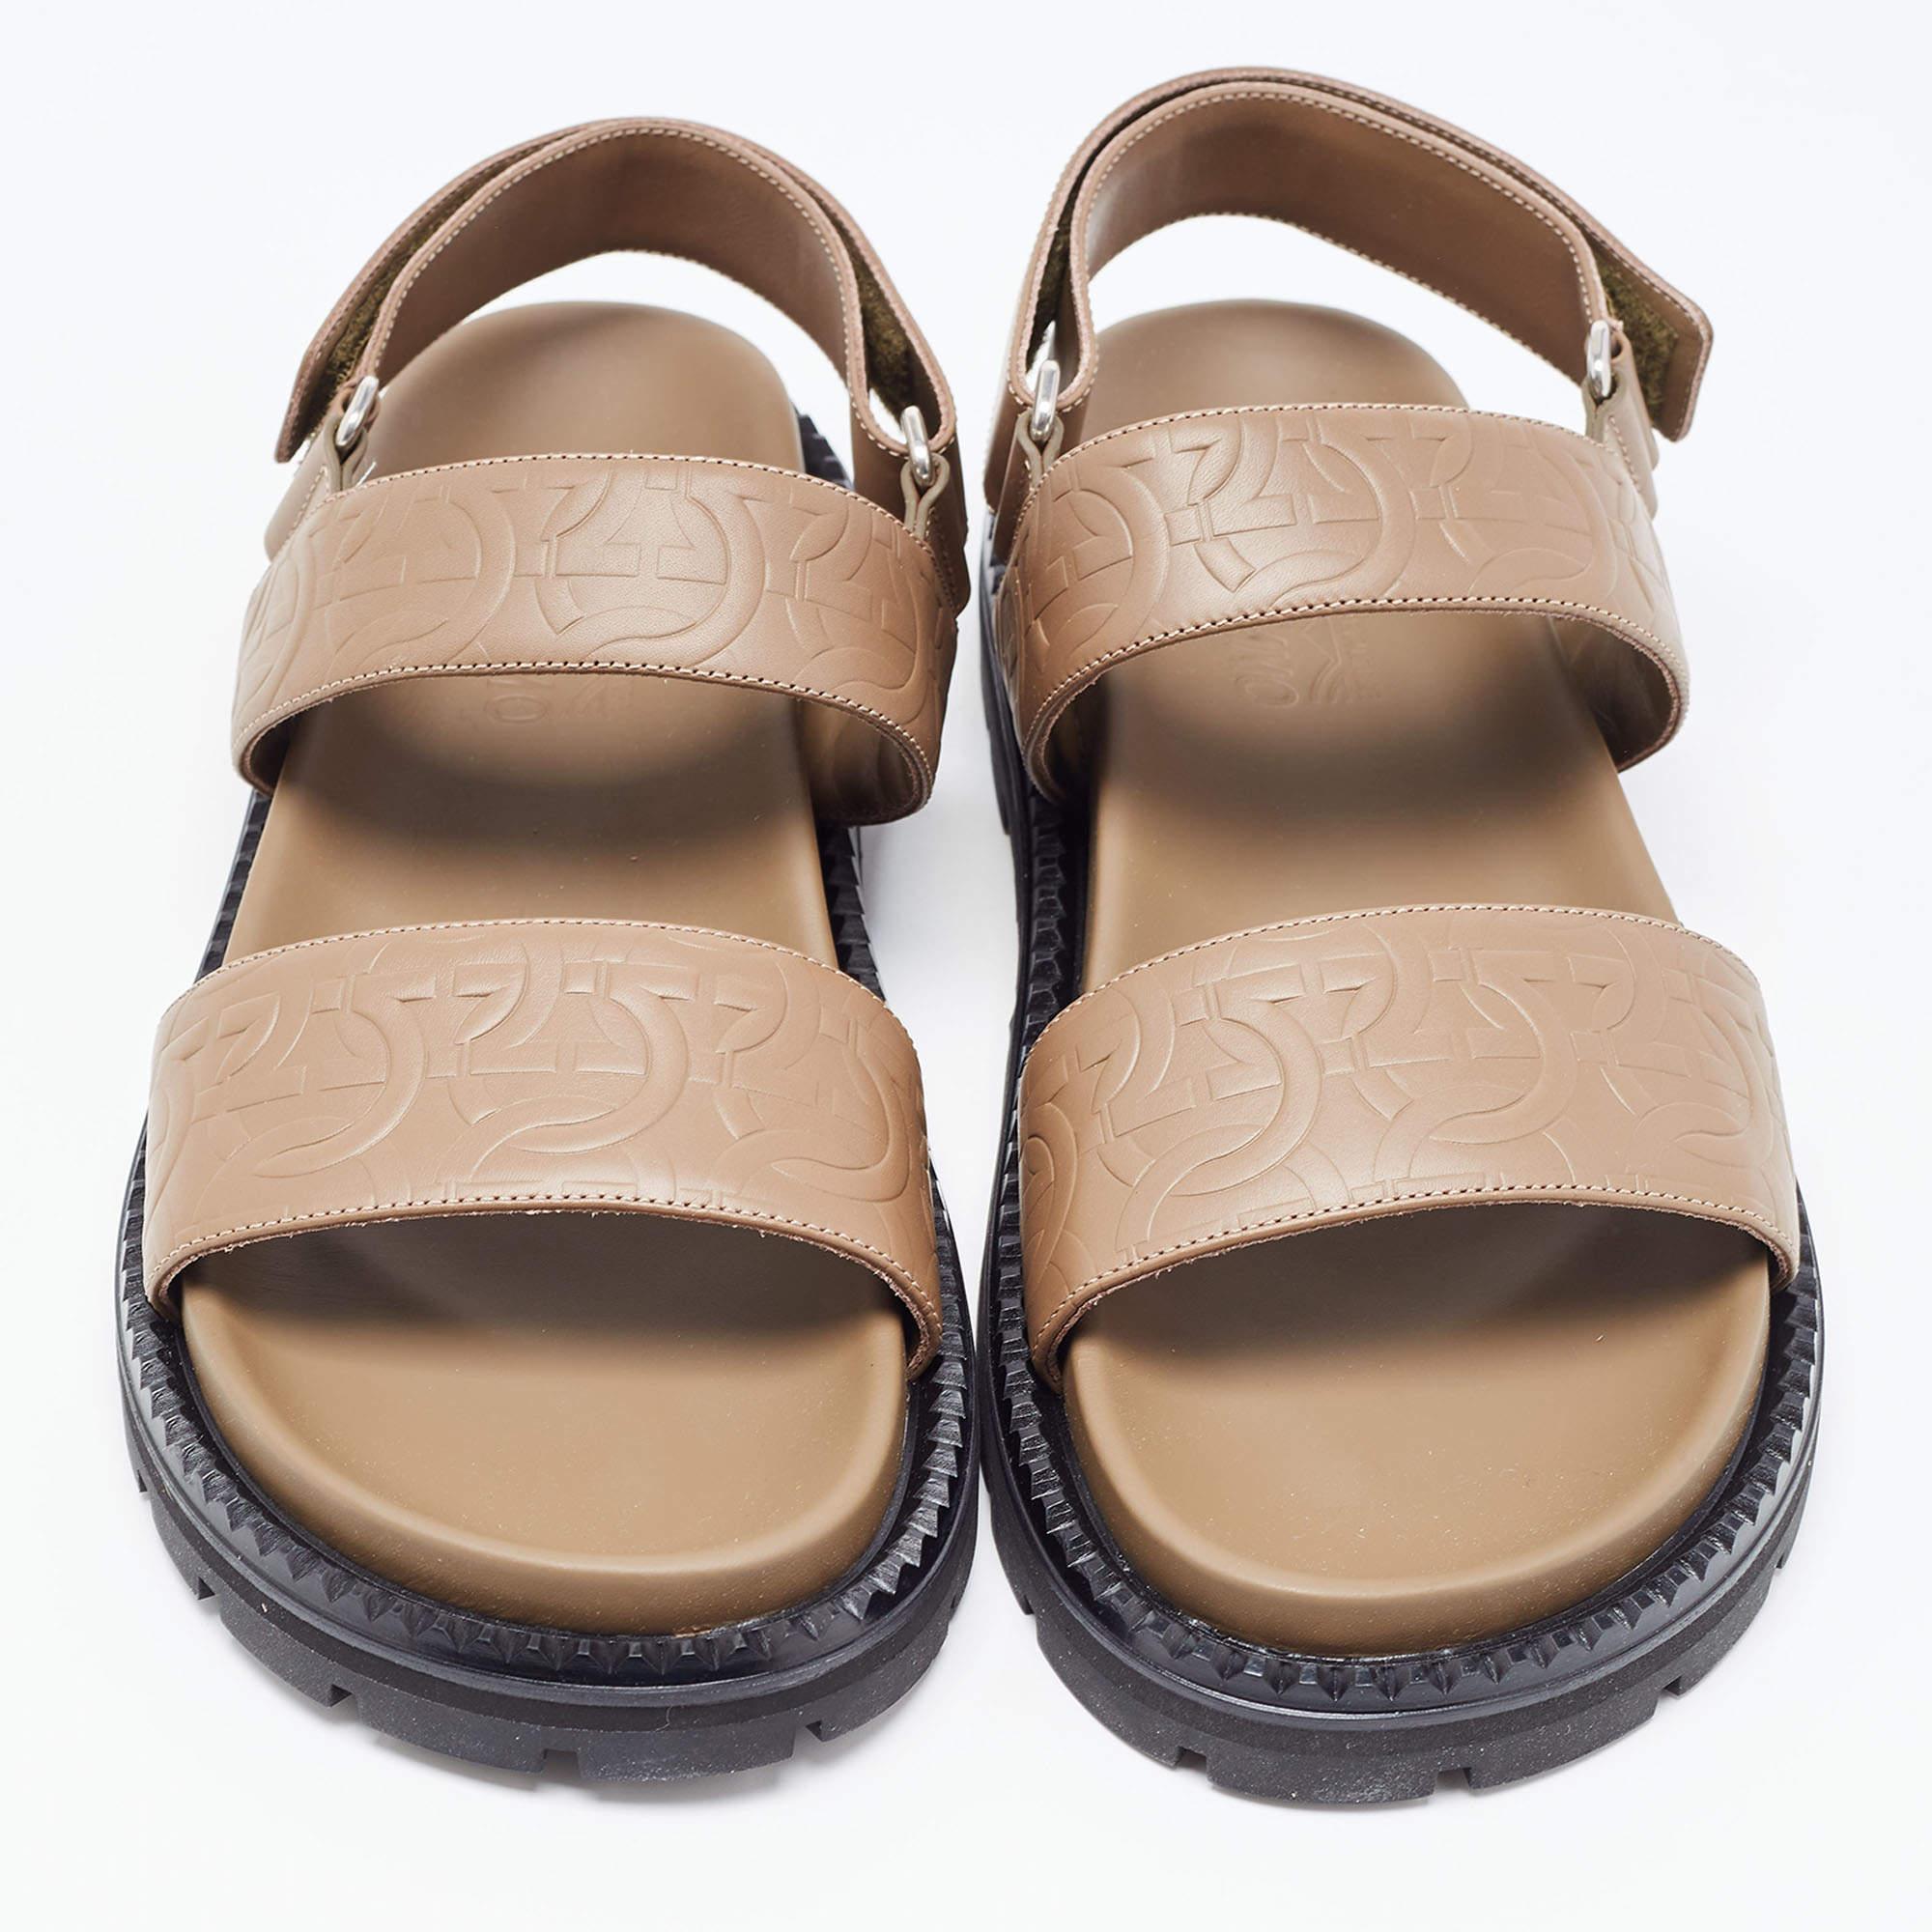 These sandals will offer you both luxury and comfort. Made from quality materials, they come in a versatile shade and are equipped with comfortable insoles.

Includes
Original Box